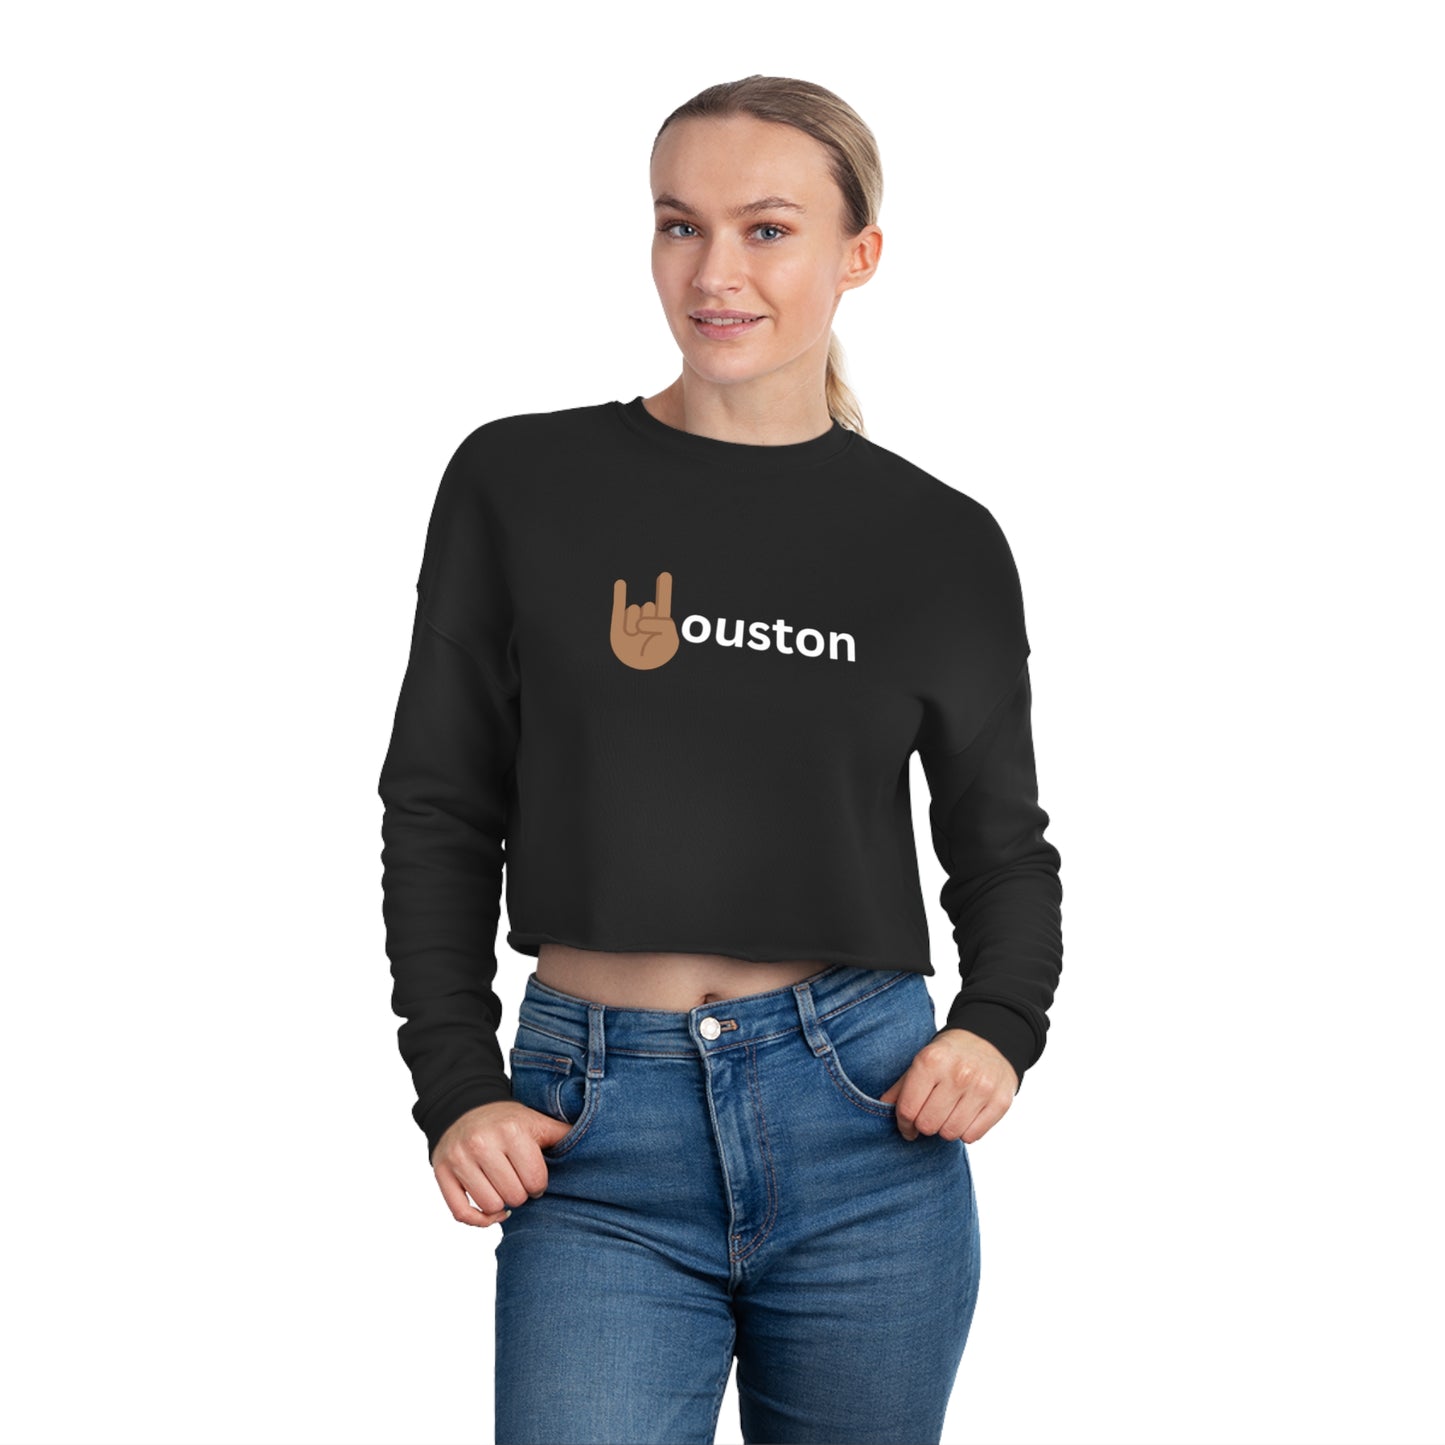 Houston Throw Up Your 🤘🏾 Brown Cropped Sweatshirt